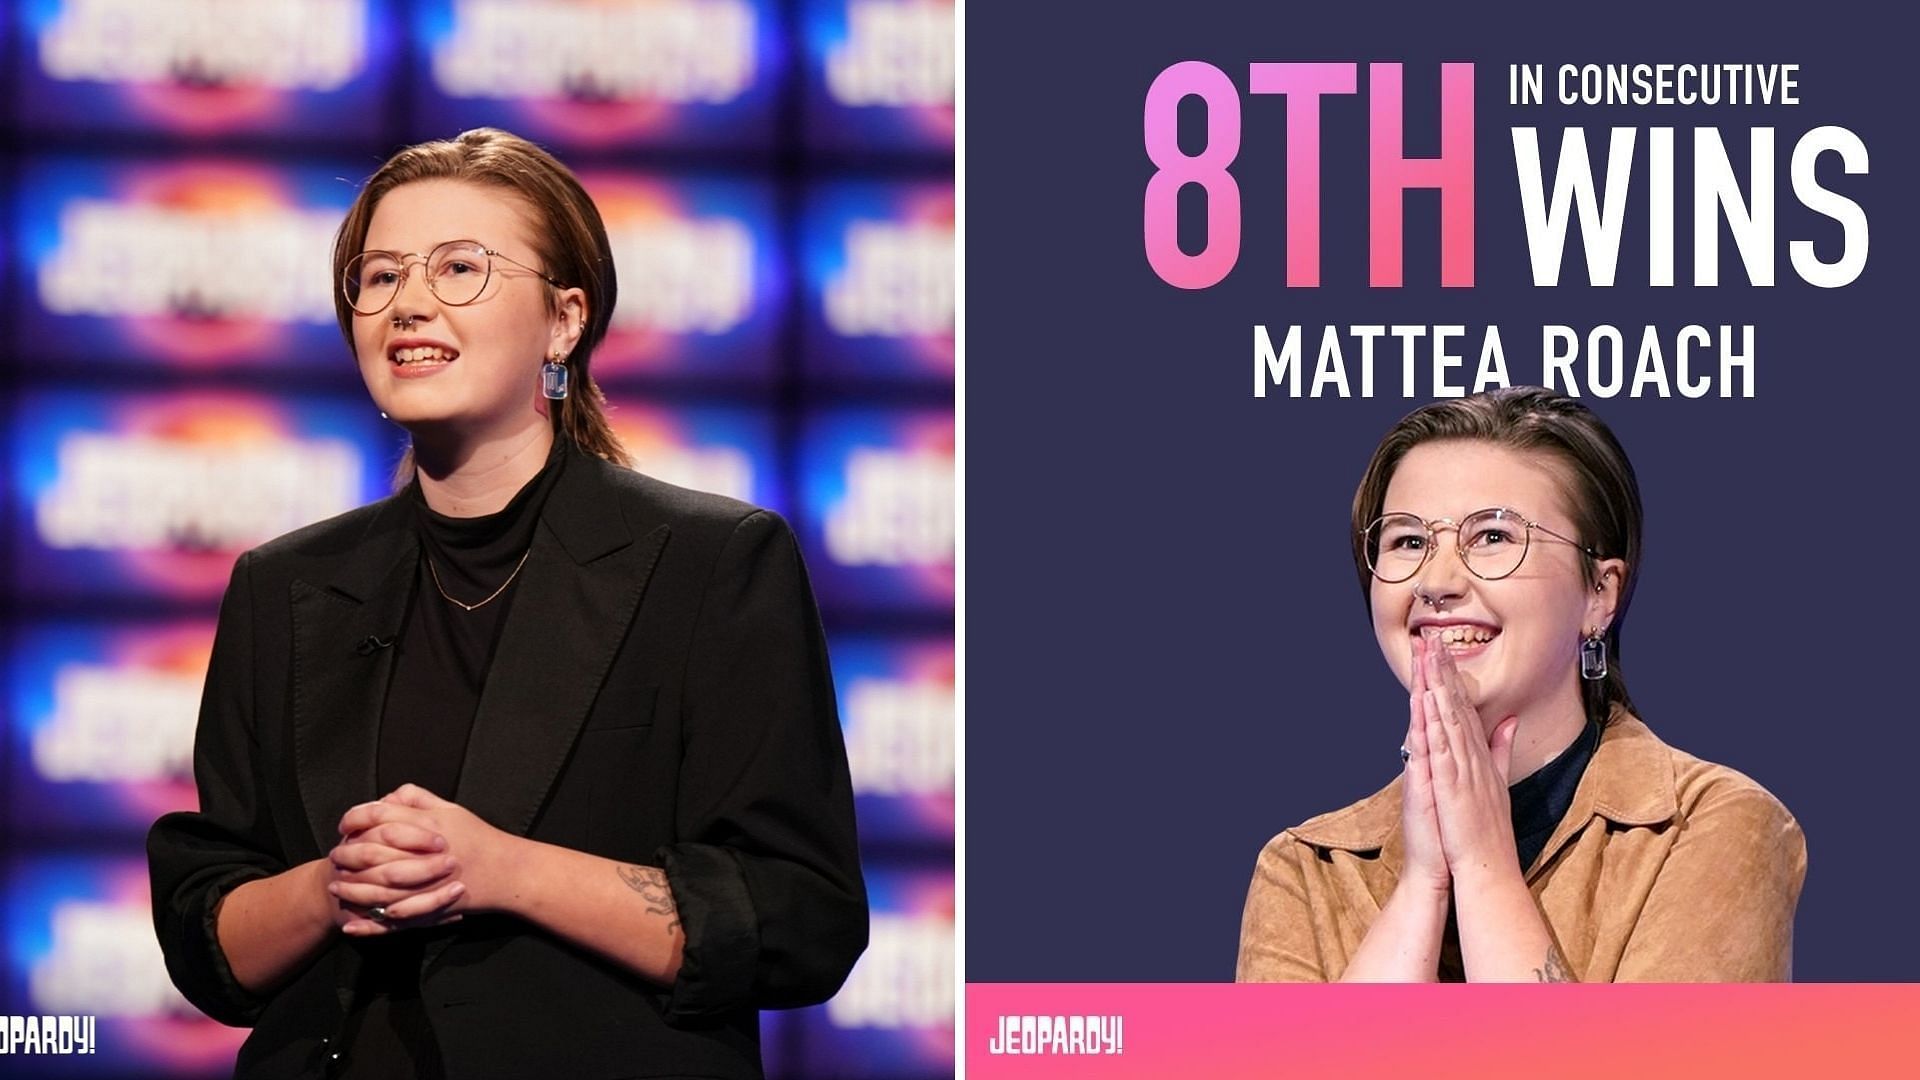 Jeopardy! contestant Mattea Roach is eighth on the all-time consecutive games list (Image via jeopardy/Instagram)